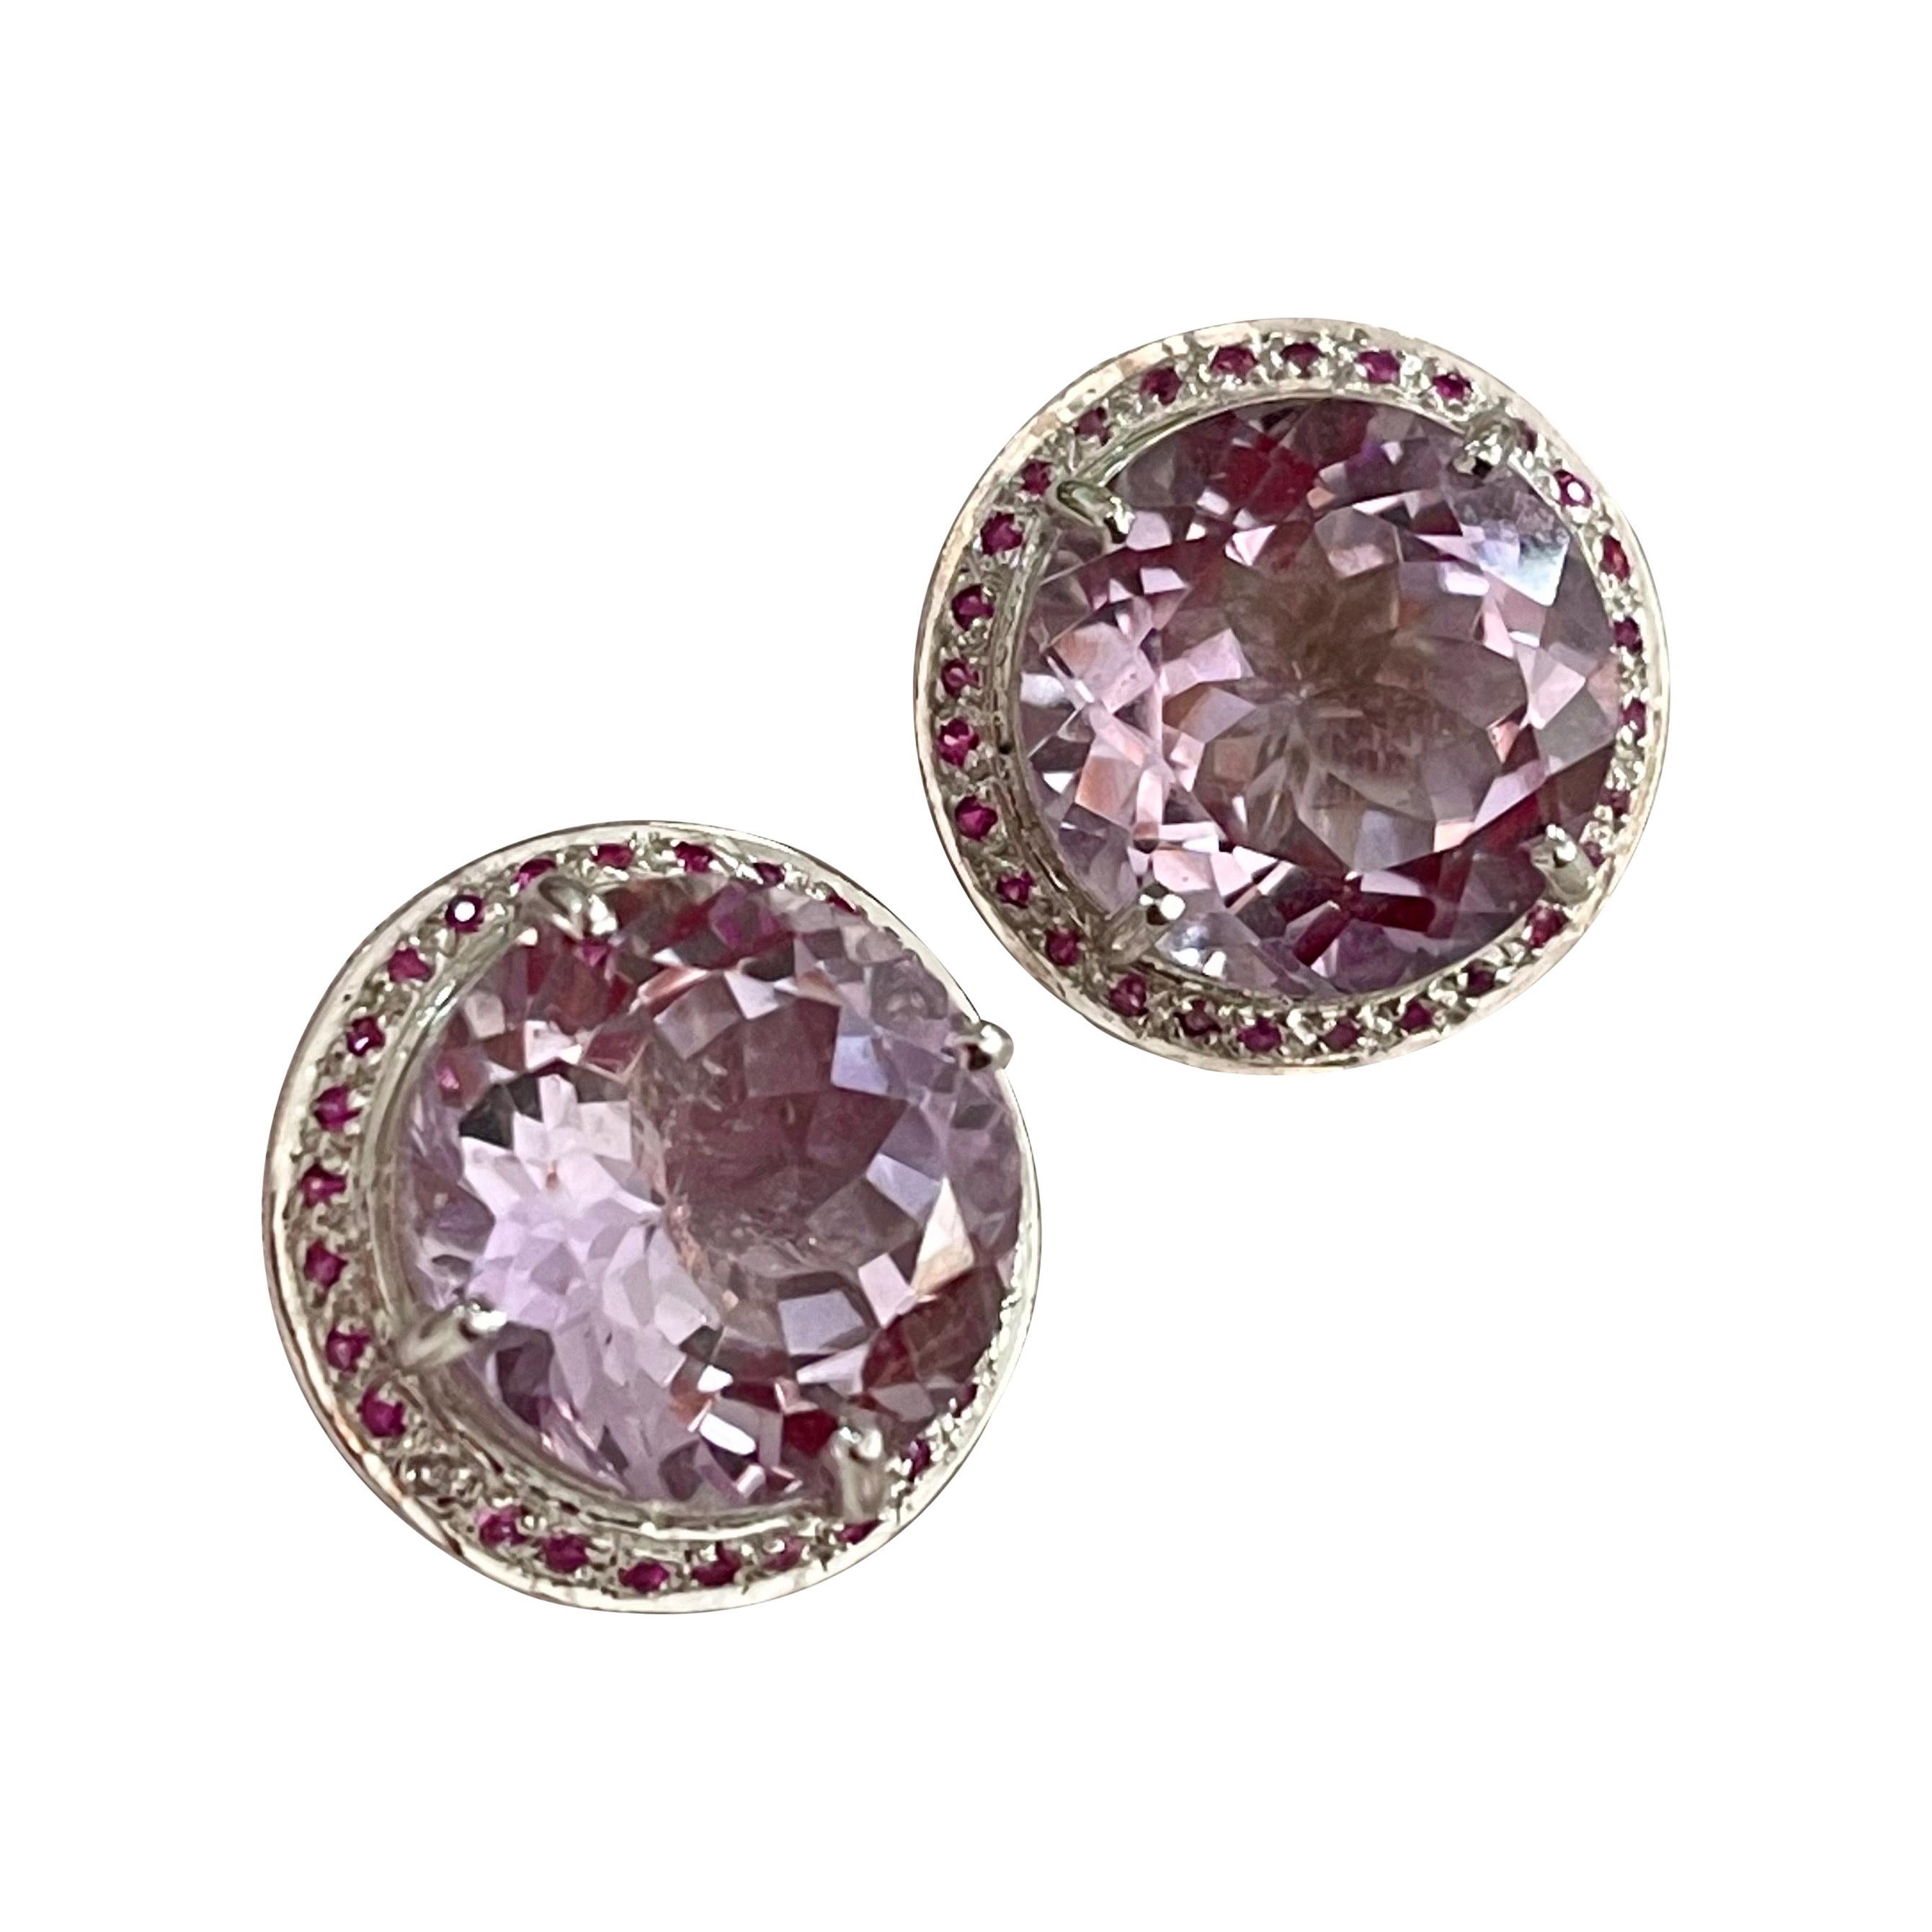 24 Ct Round Natural Pink Amethyst Earrings 18 Karat White Gold Post Backs For Sale